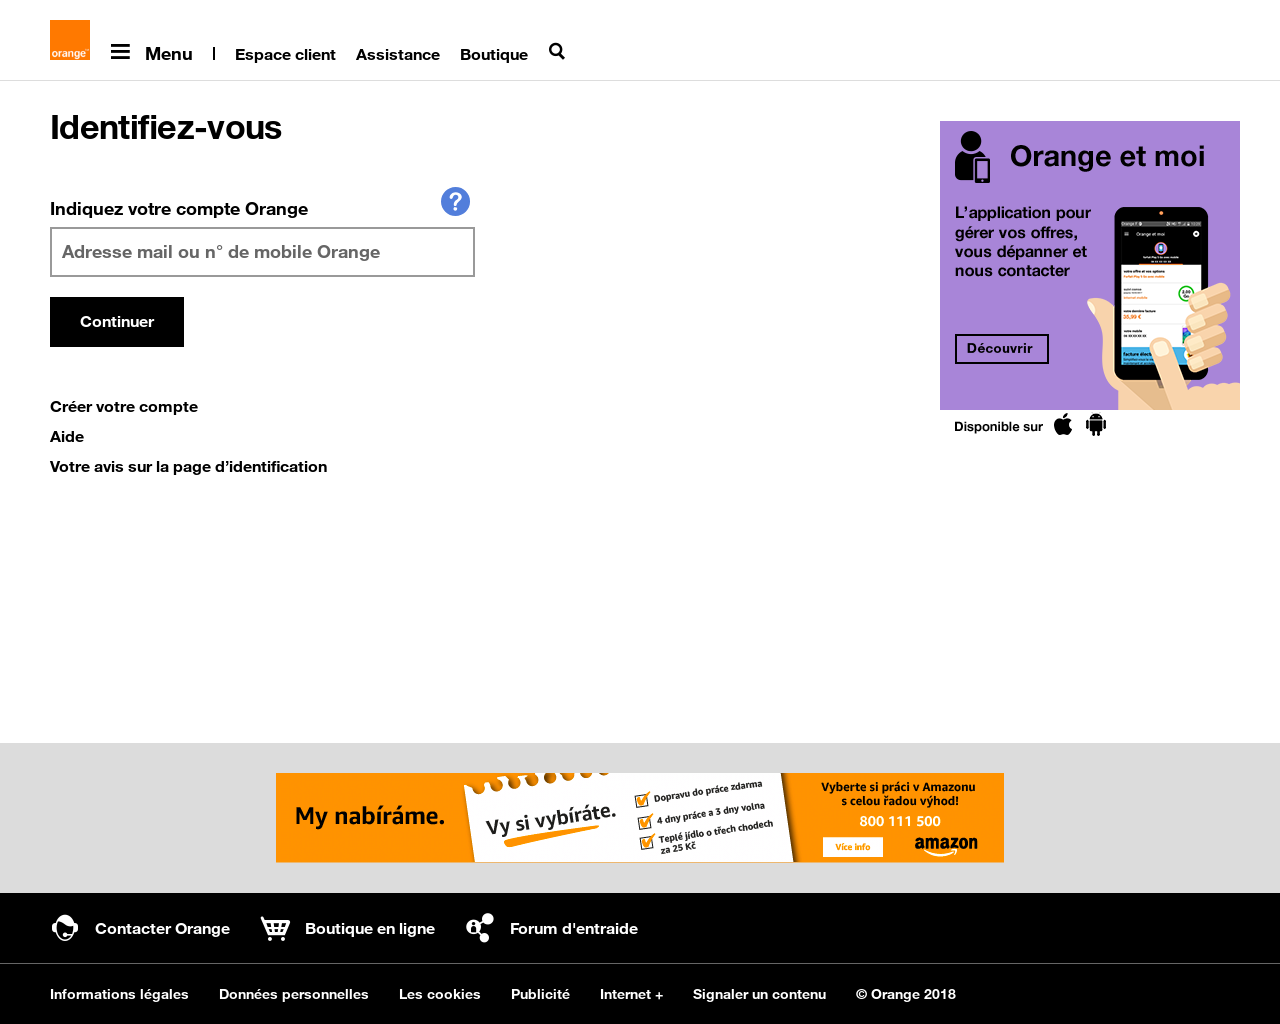 avast browser extension phishing